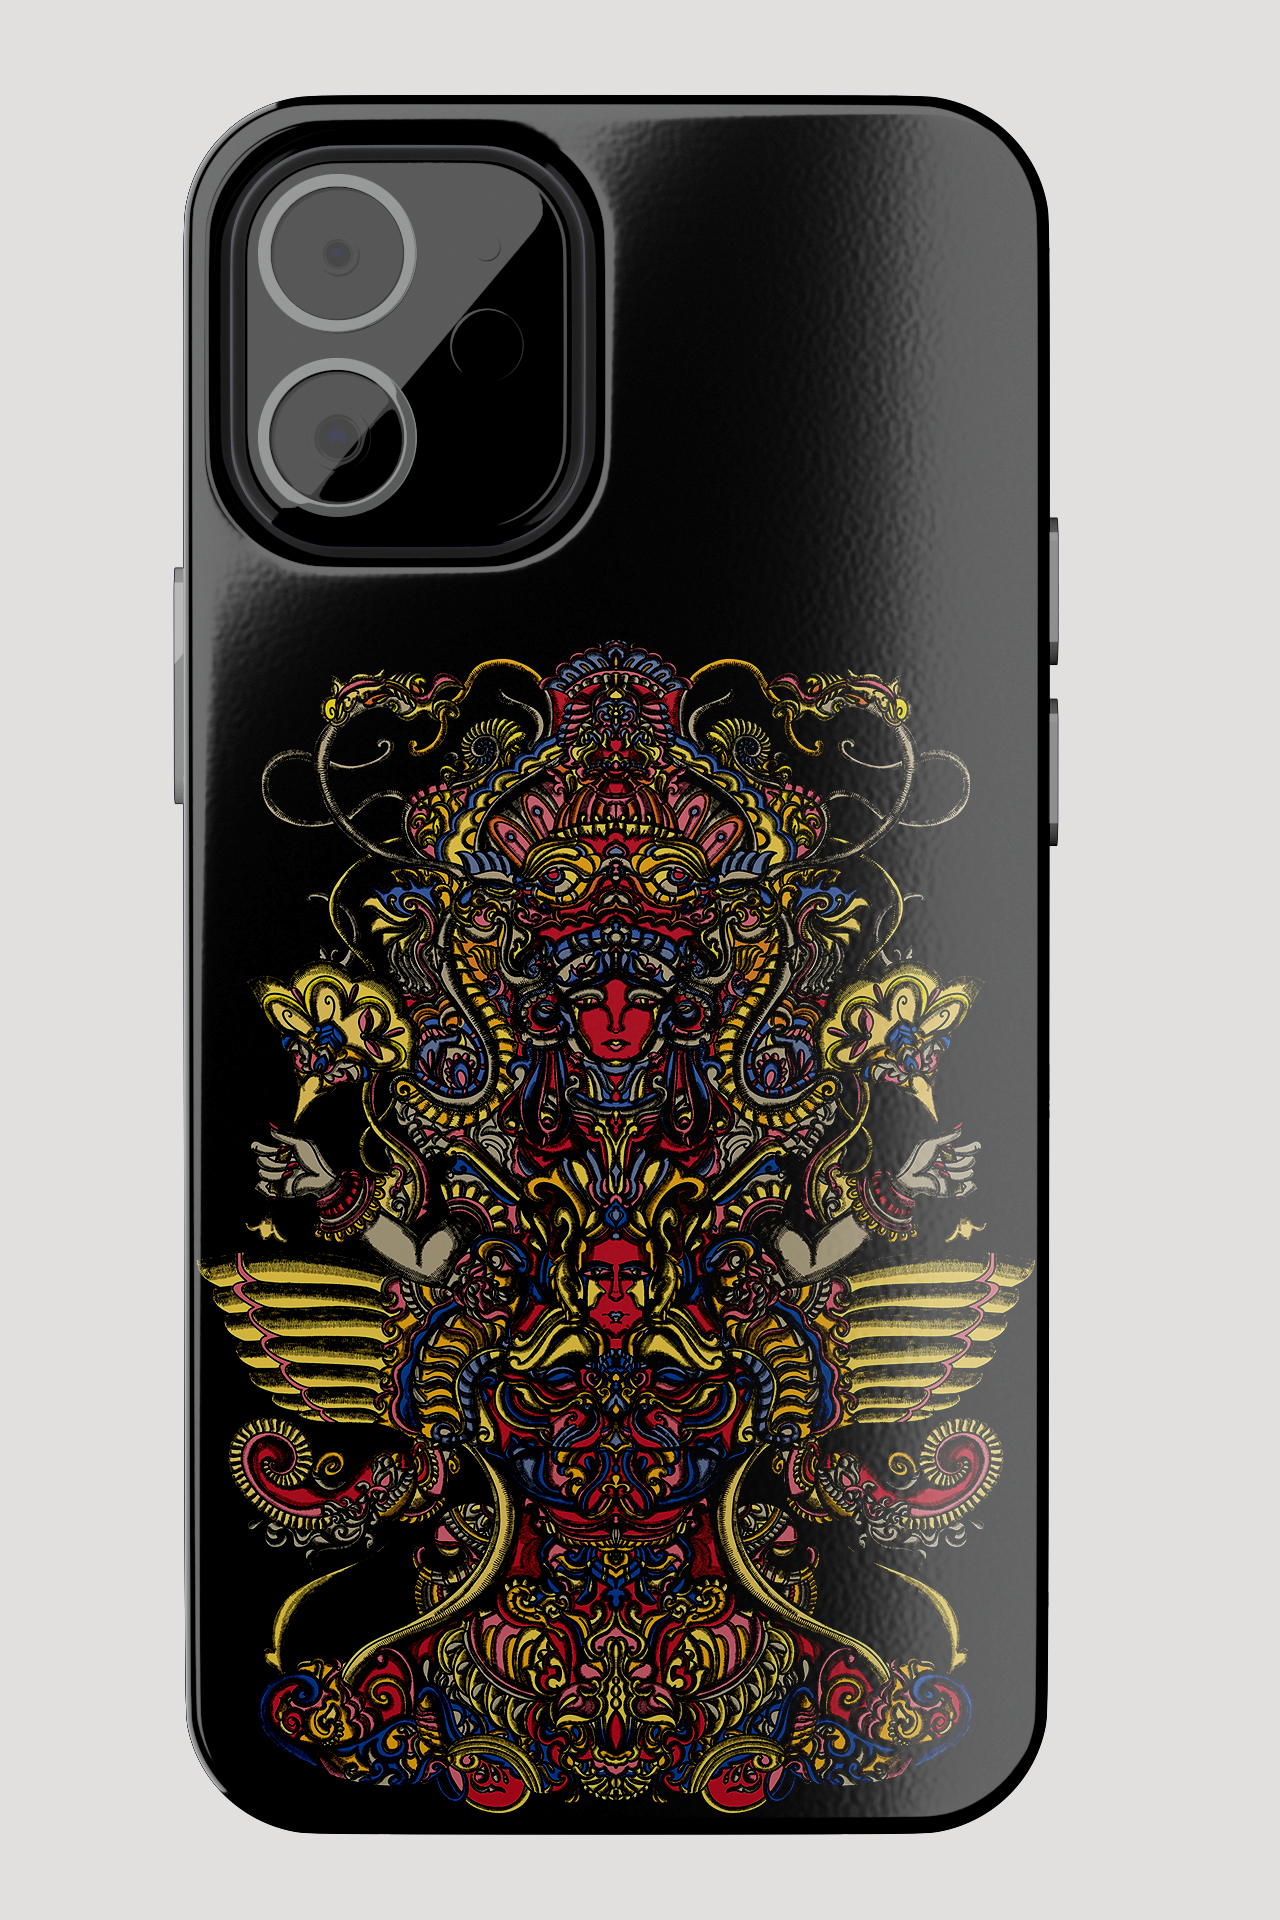 MOBILE CASE COVER: PATTERN 1